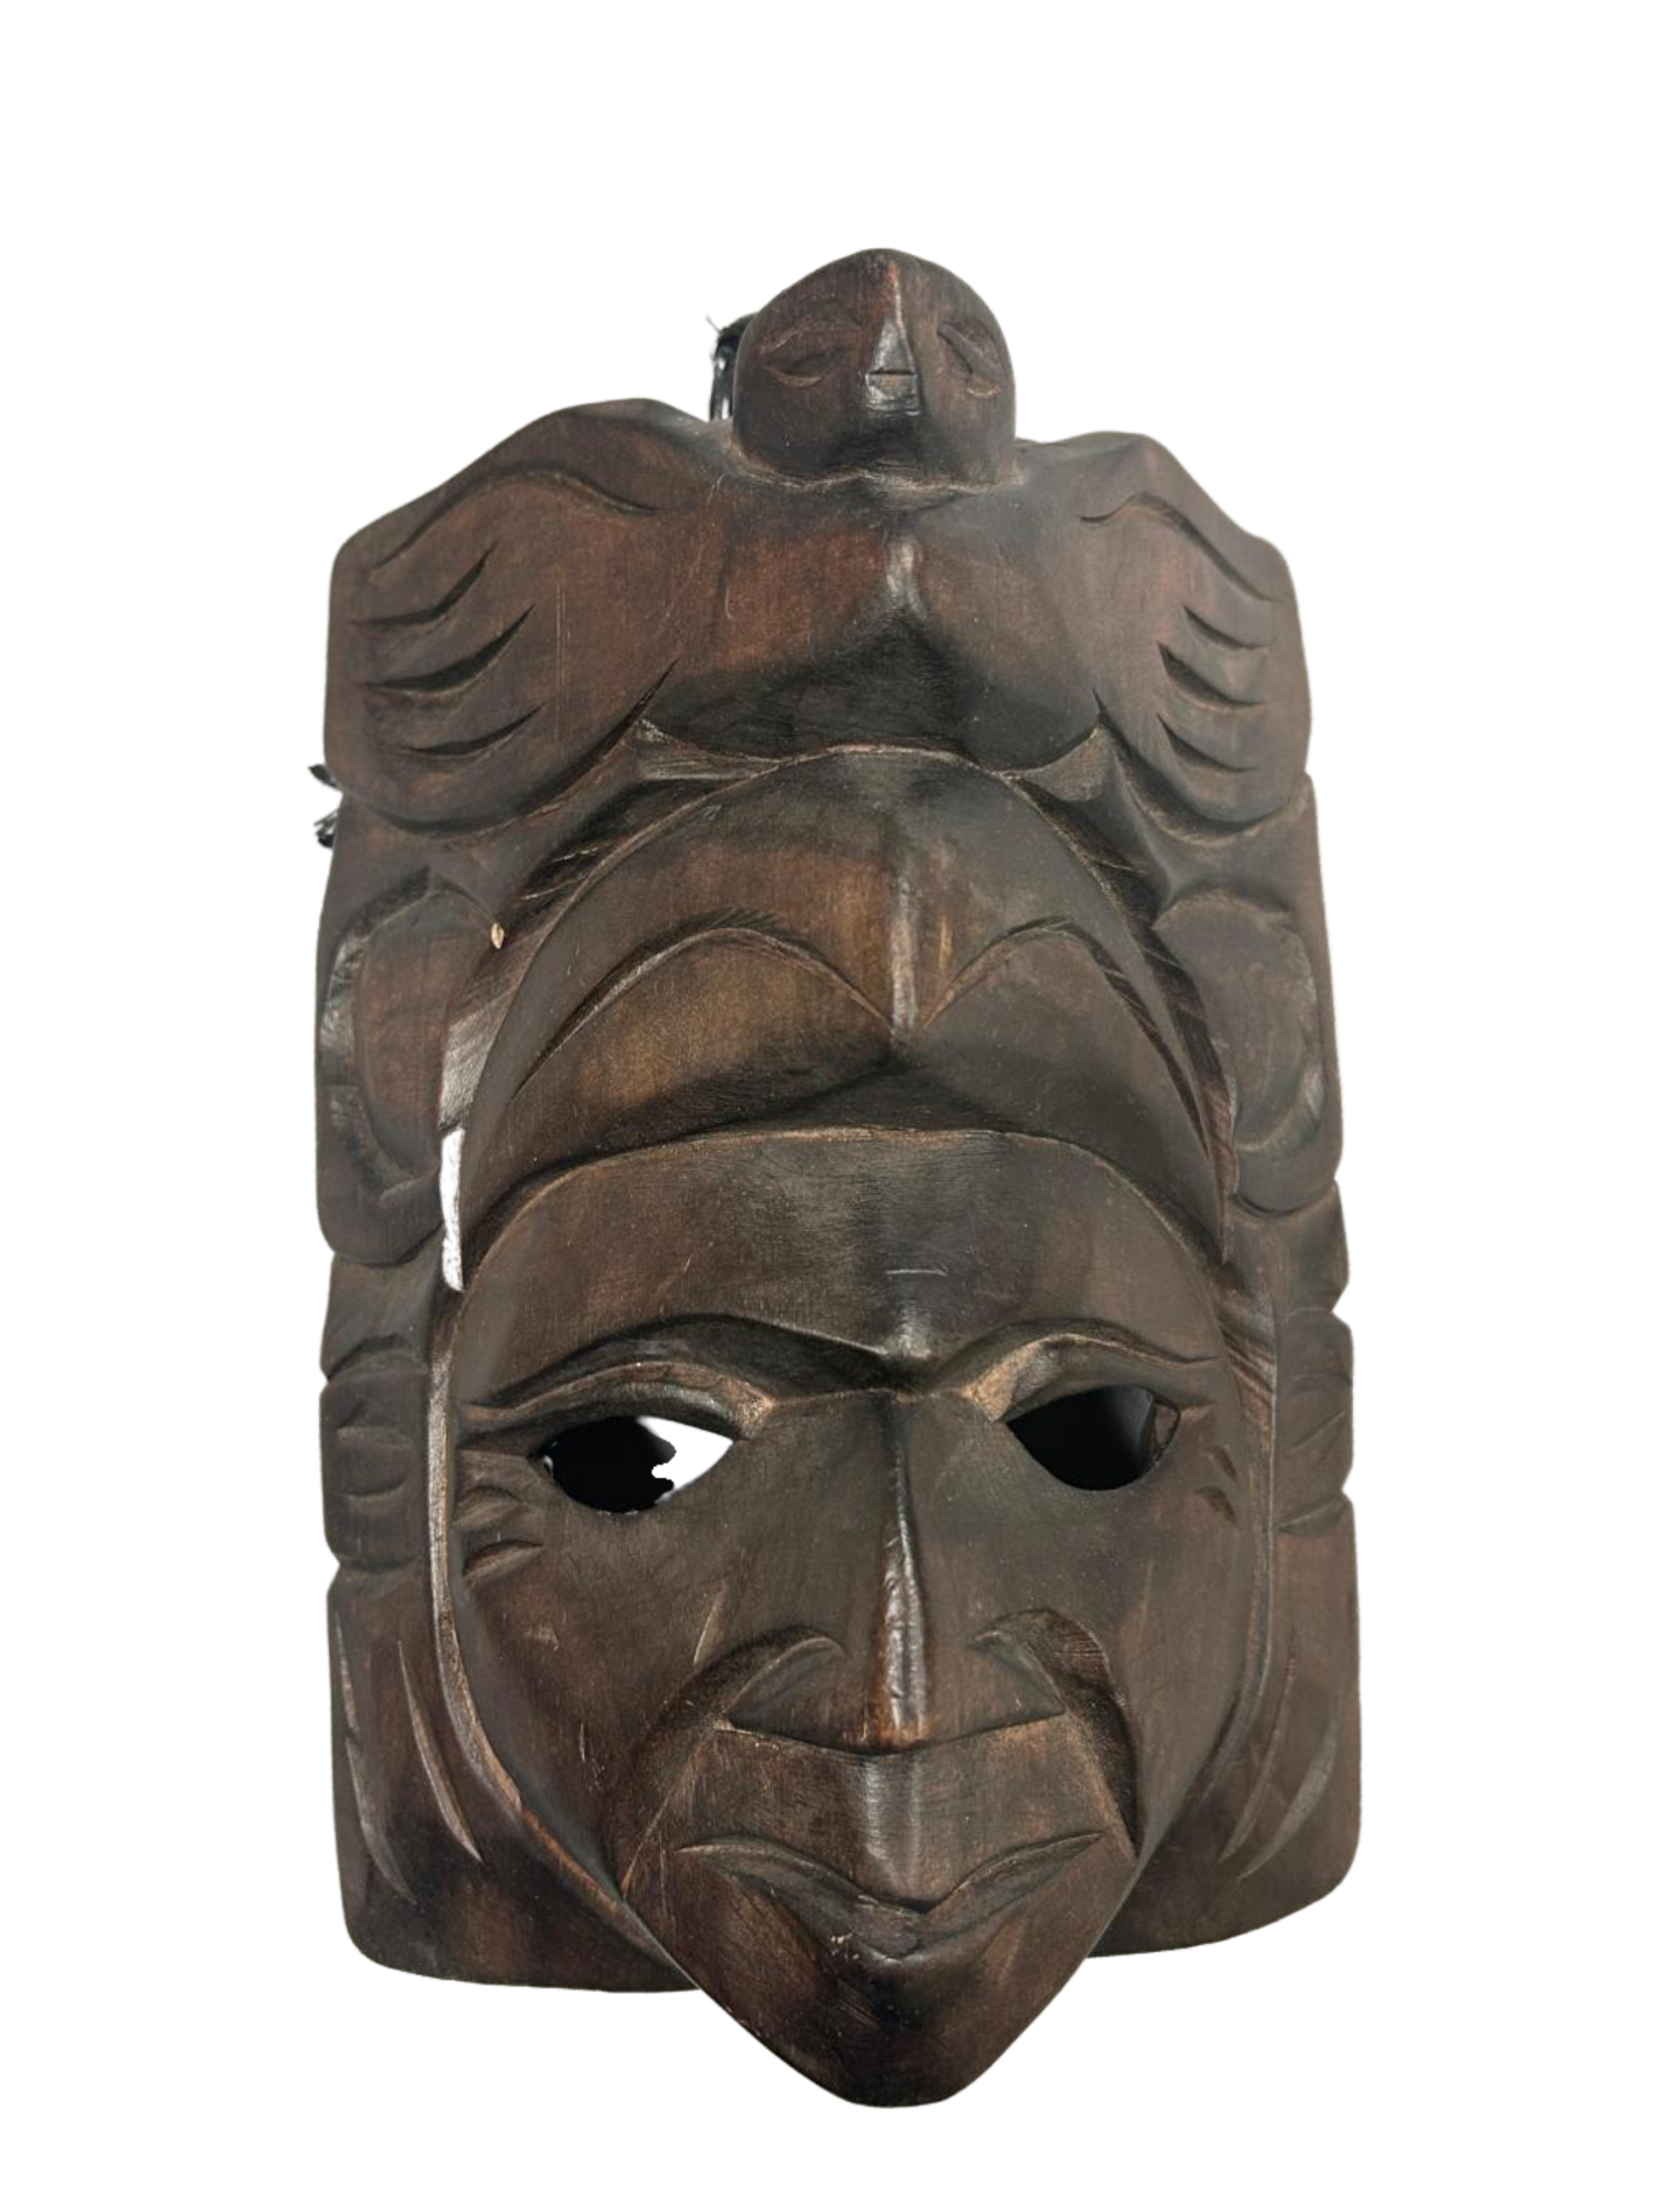 This masterful wooden mask, echoes historical aesthetics, with accents amplifying its rich heritage and artistic value, available as shown at the hearing clinic at Allard Audiology.